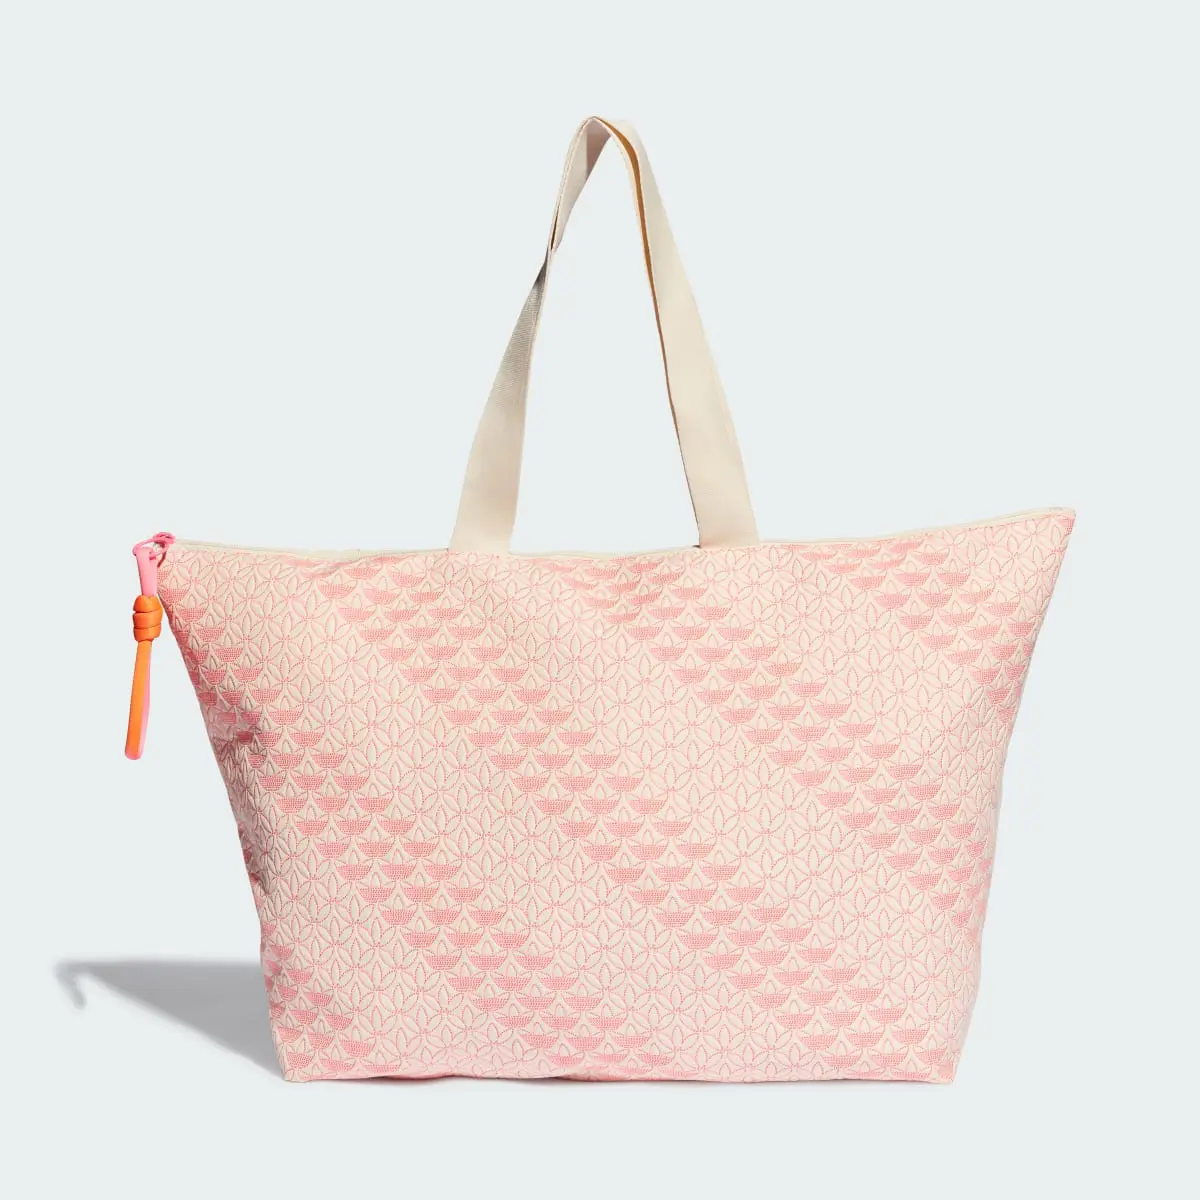 Adidas Quilted Trefoil Shopper. 2